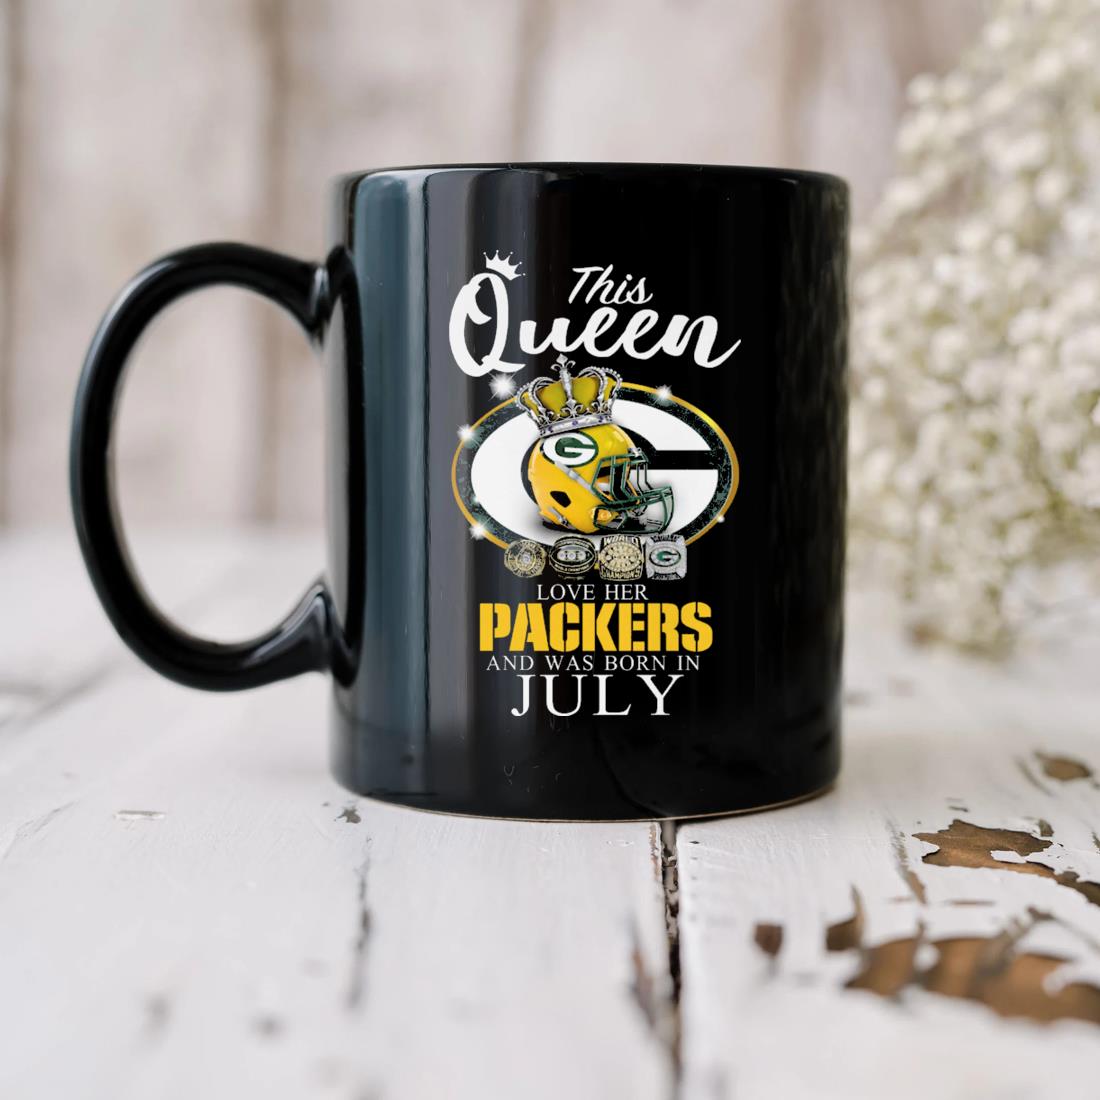 This Queen Love Her Packers And Was Born In July Mug